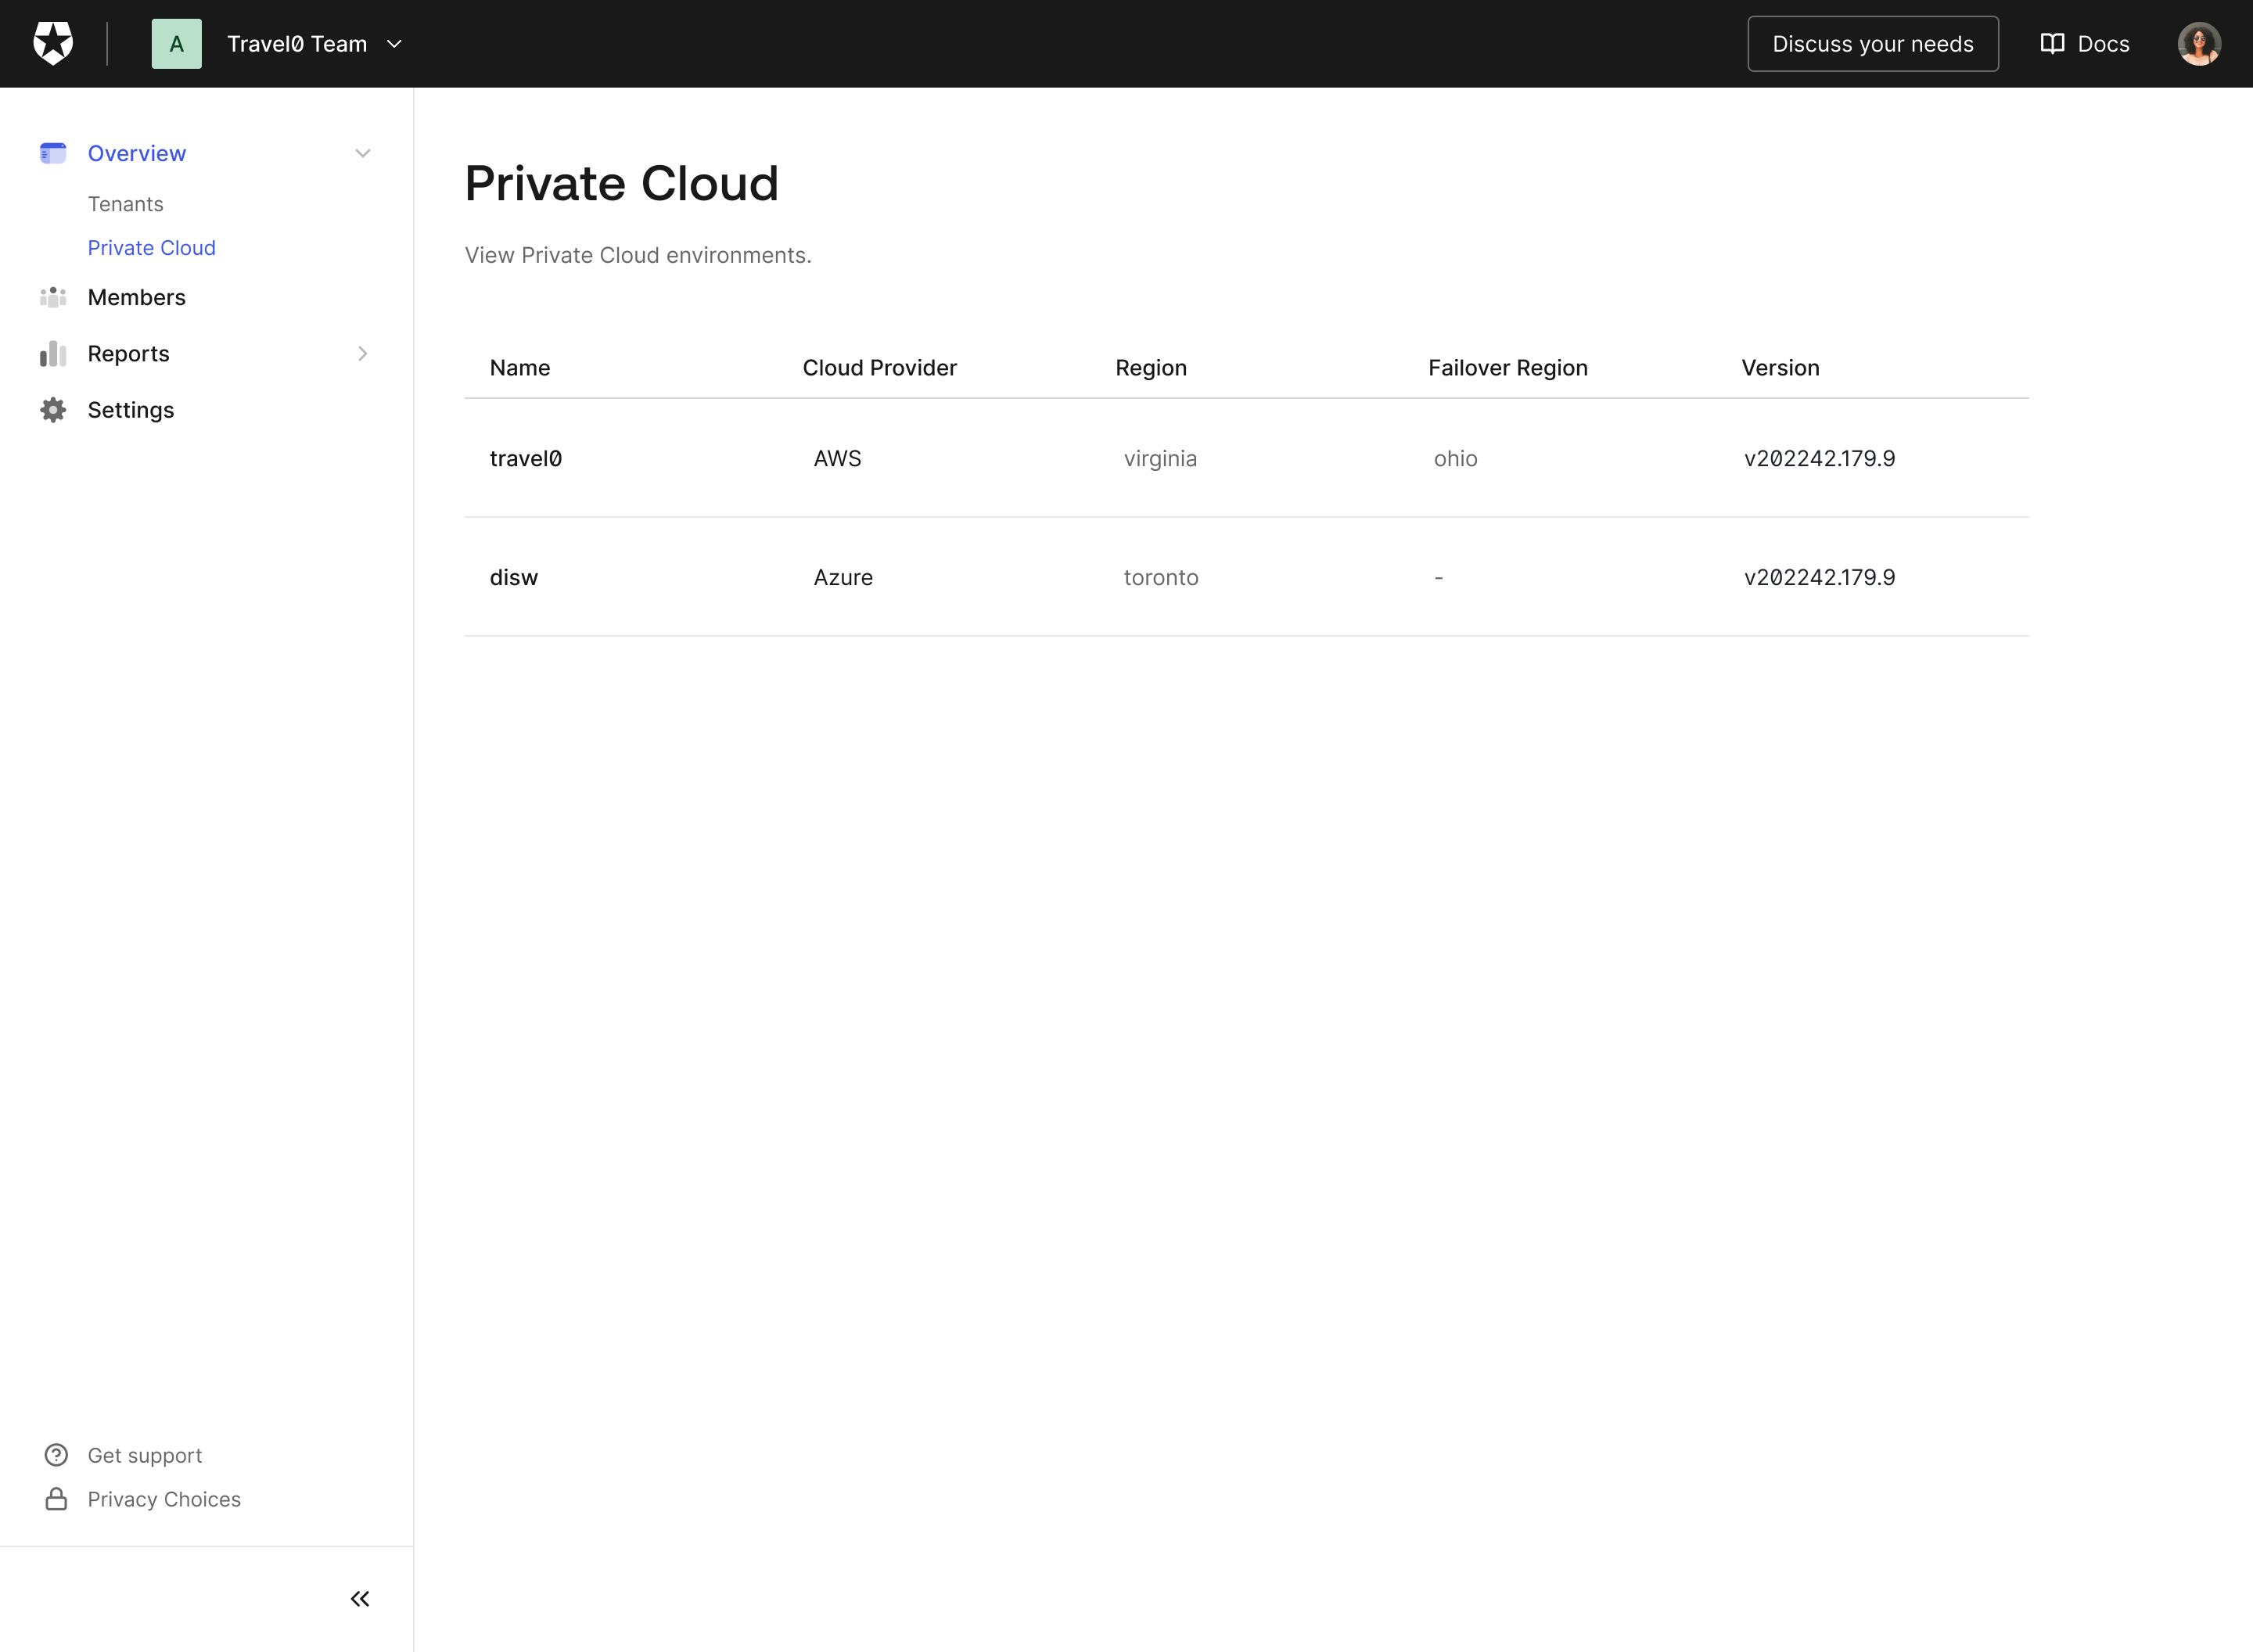 Environment List for Teams Private Cloud, Name, Cloud Provider, Region